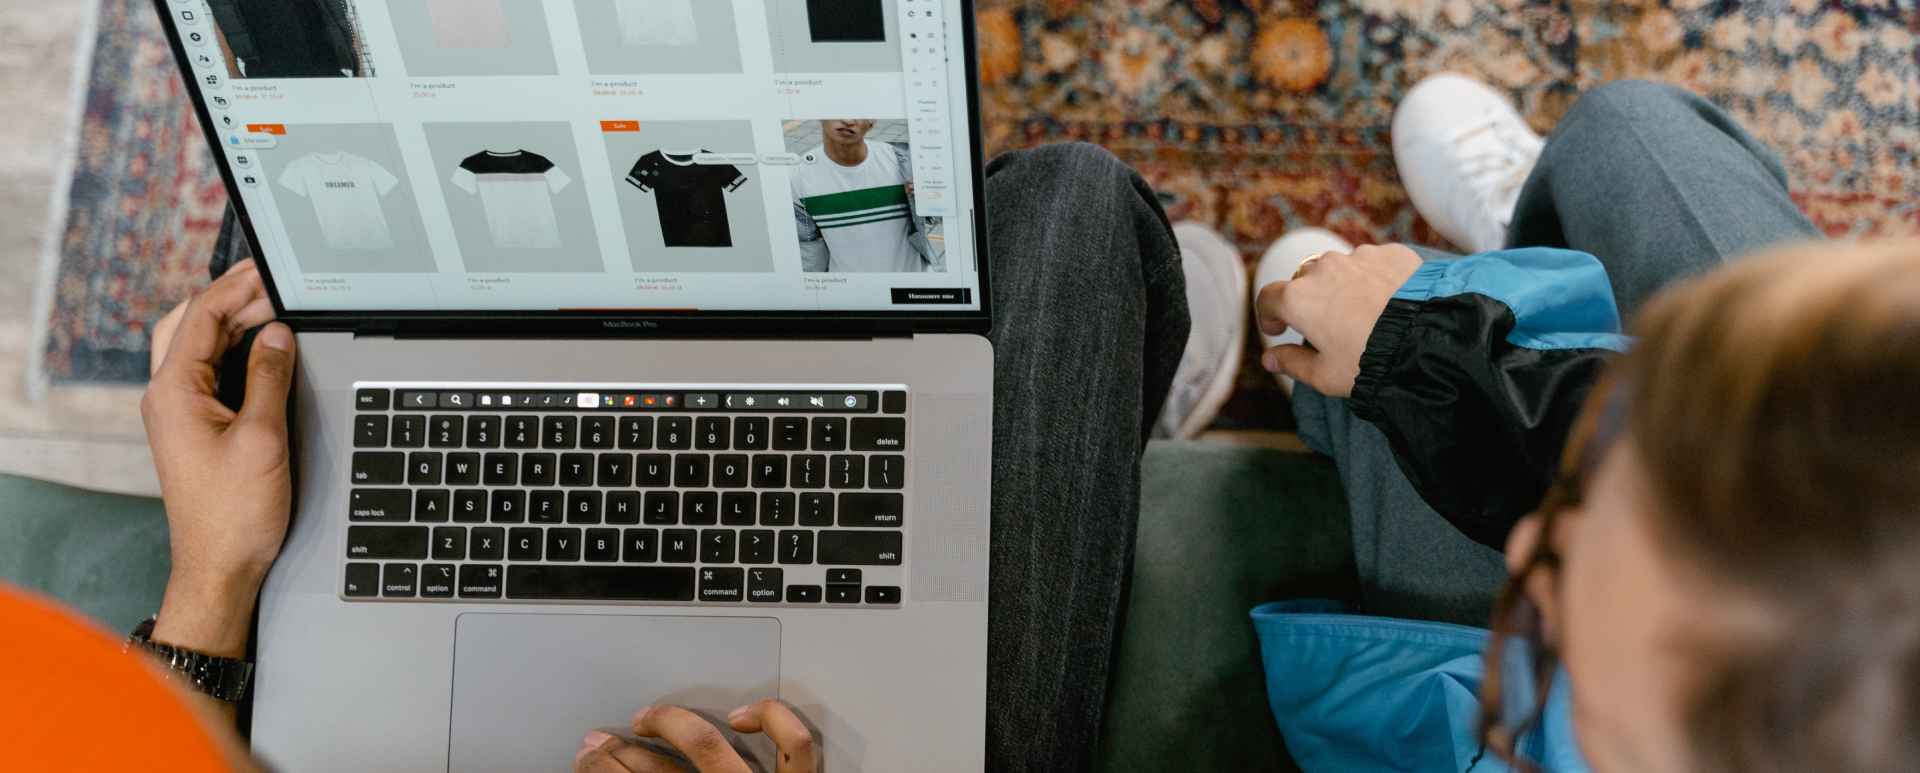 Two people sitting on a couch creating an online store for t-shirts.